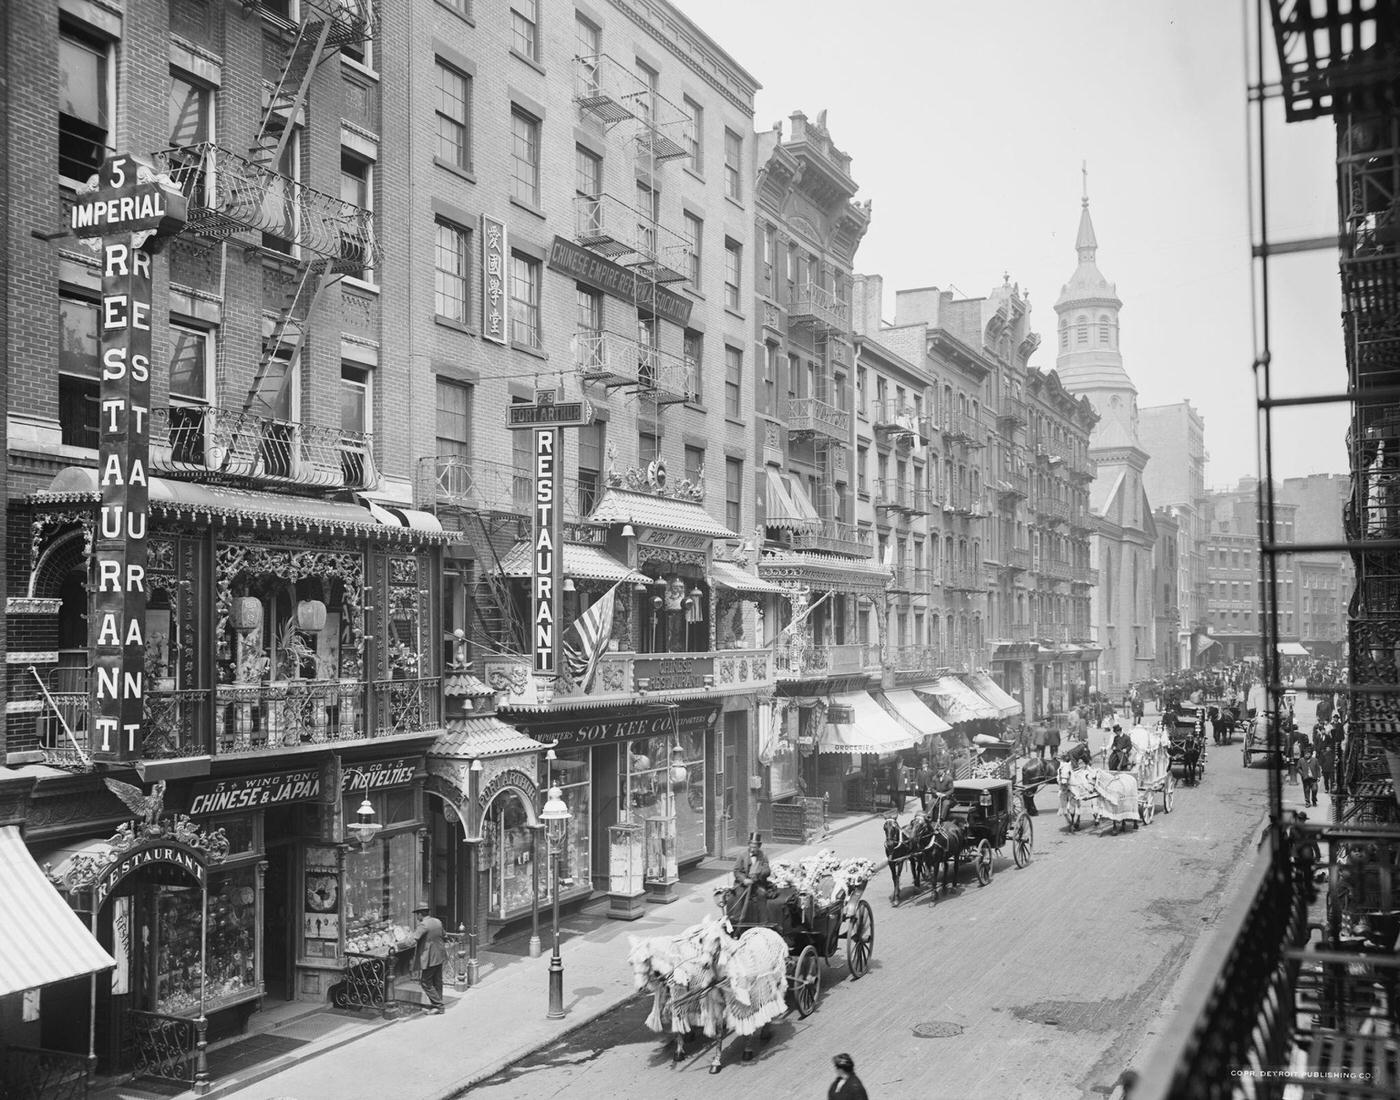 View Looking North, Showing Chinese Restaurants And Stores On Mott Street, Manhattan, 1905